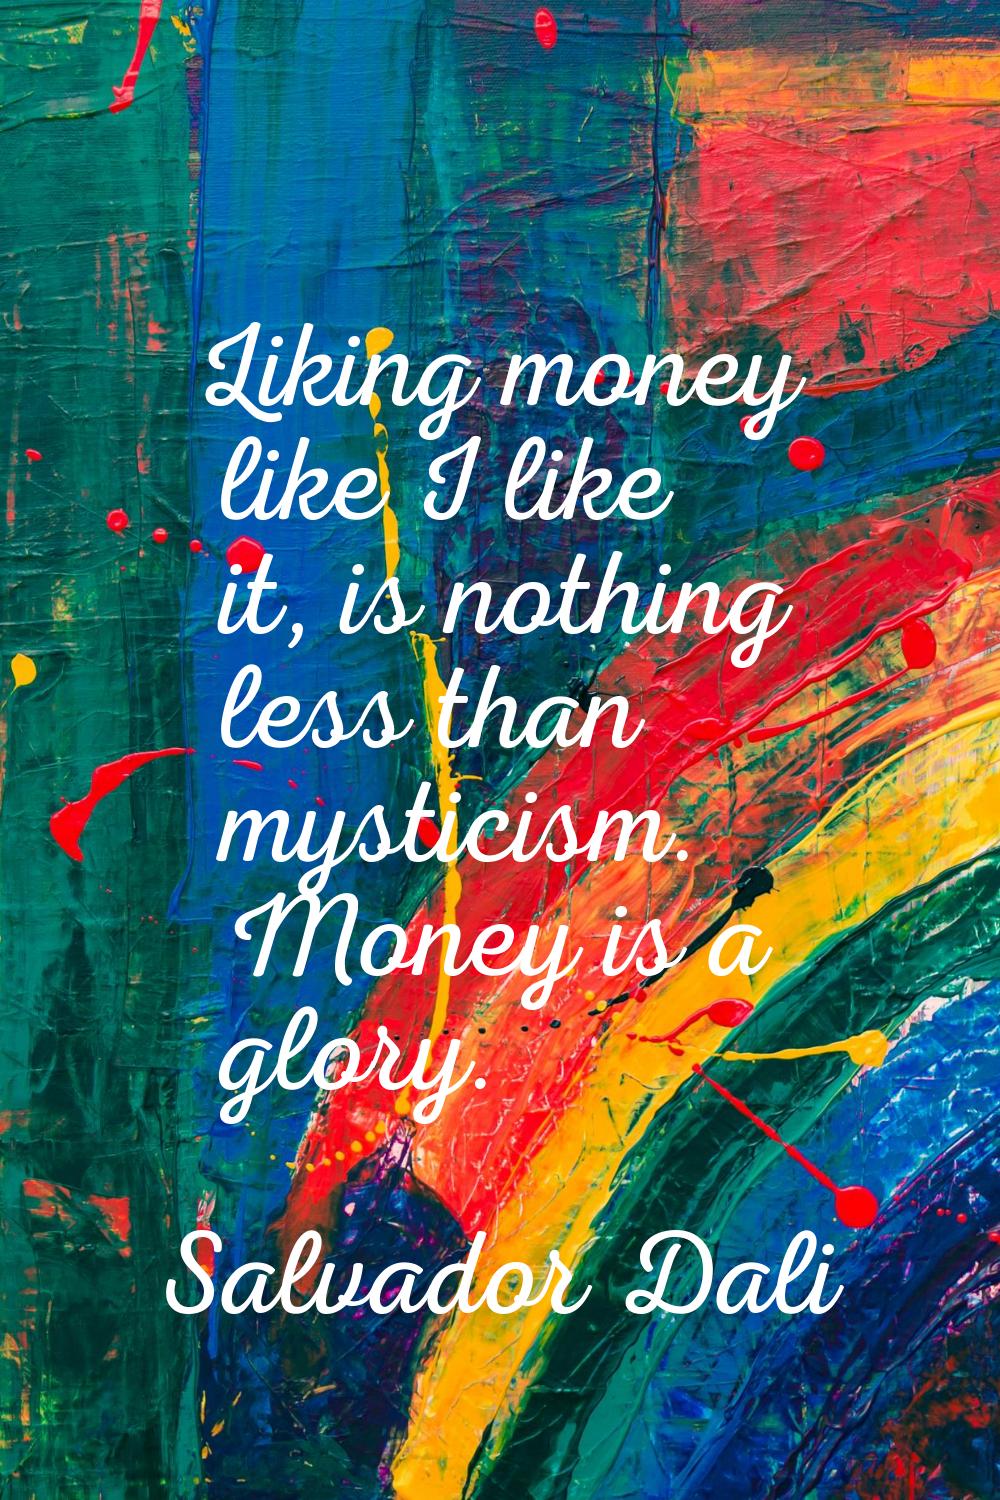 Liking money like I like it, is nothing less than mysticism. Money is a glory.